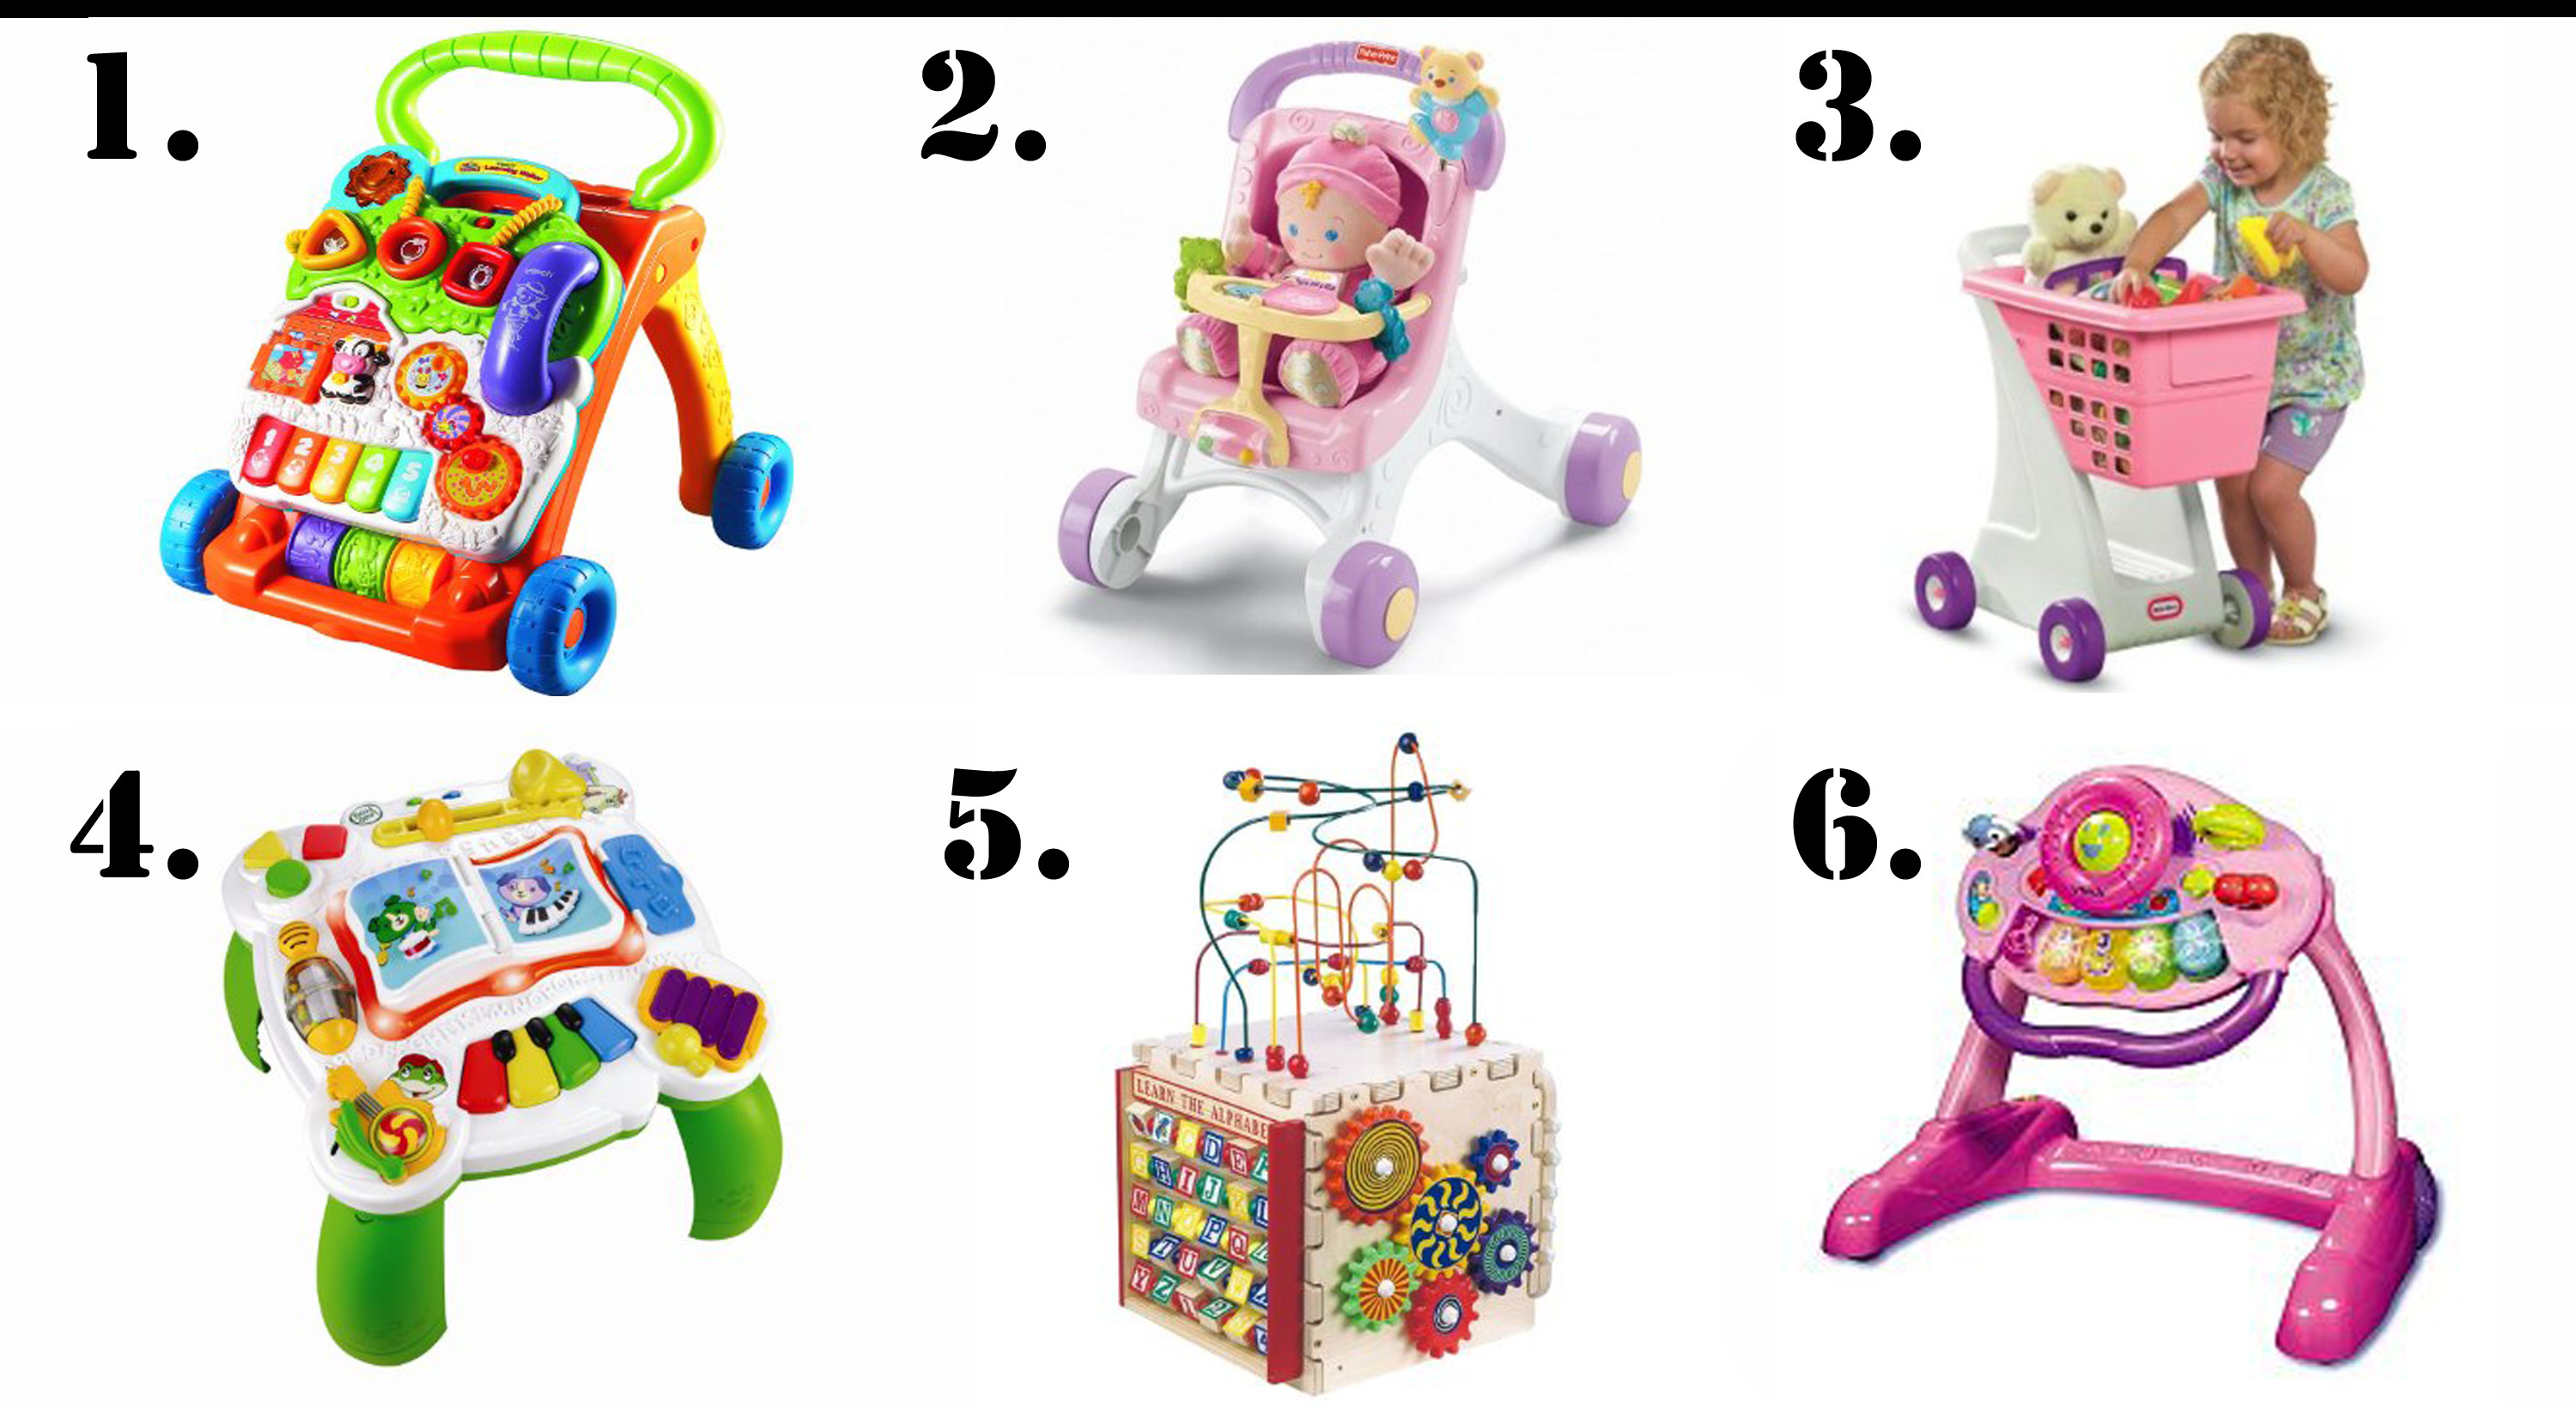 Birthday Gifts For 1 Year Old Baby Girl
 The Ultimate List of Gift Ideas for a 1 Year Old Girl